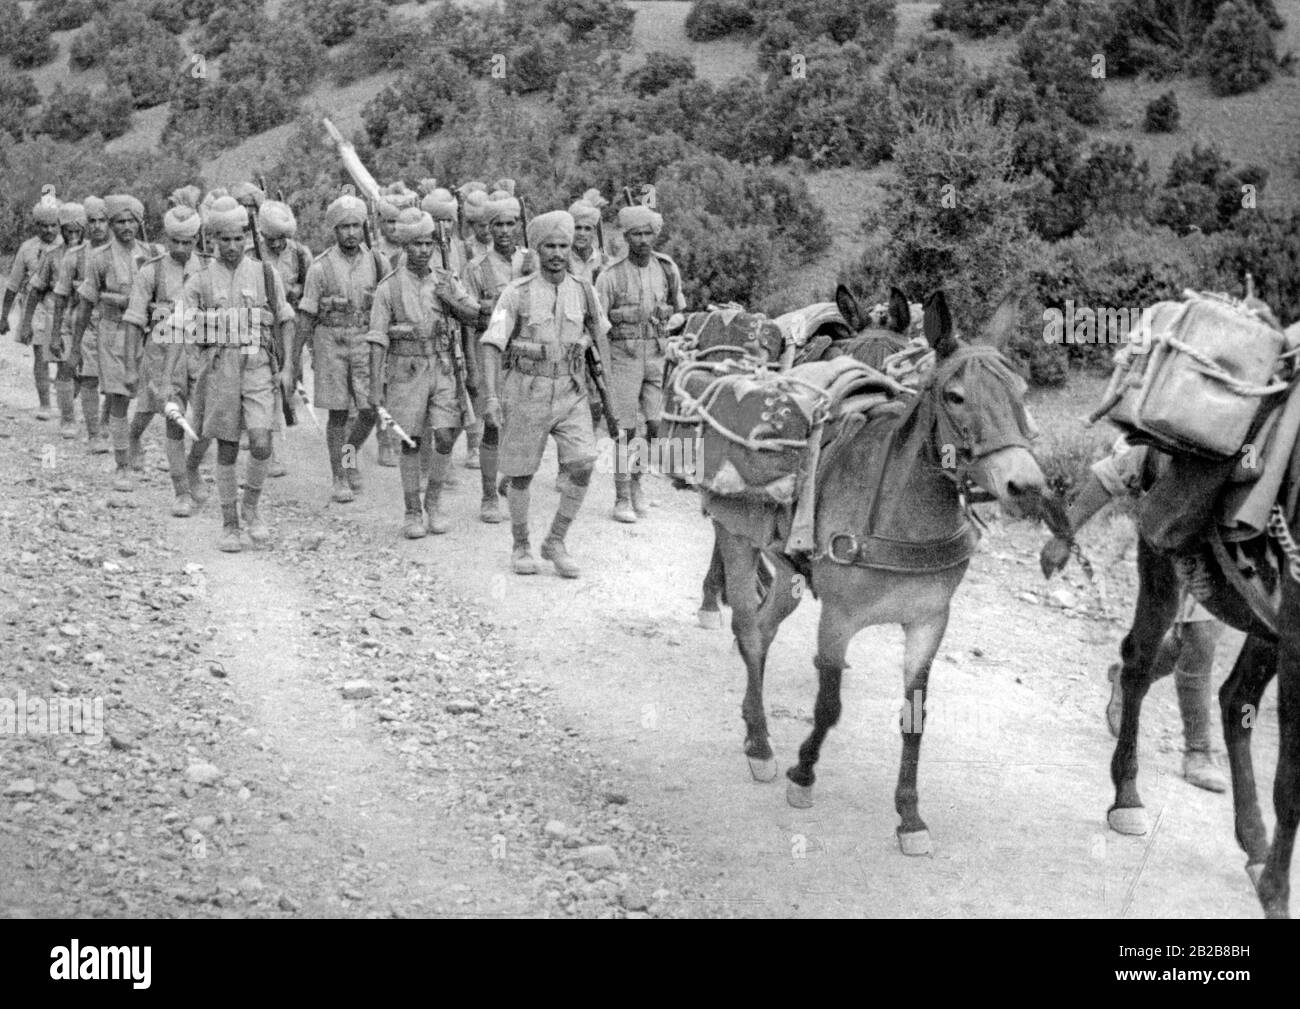 English troops to secure road construction in the Waziristan region in present-day Pakistan. The Muslim hill tribes of the region rebelled against the British colonial rulers in the 1930s. Stock Photo